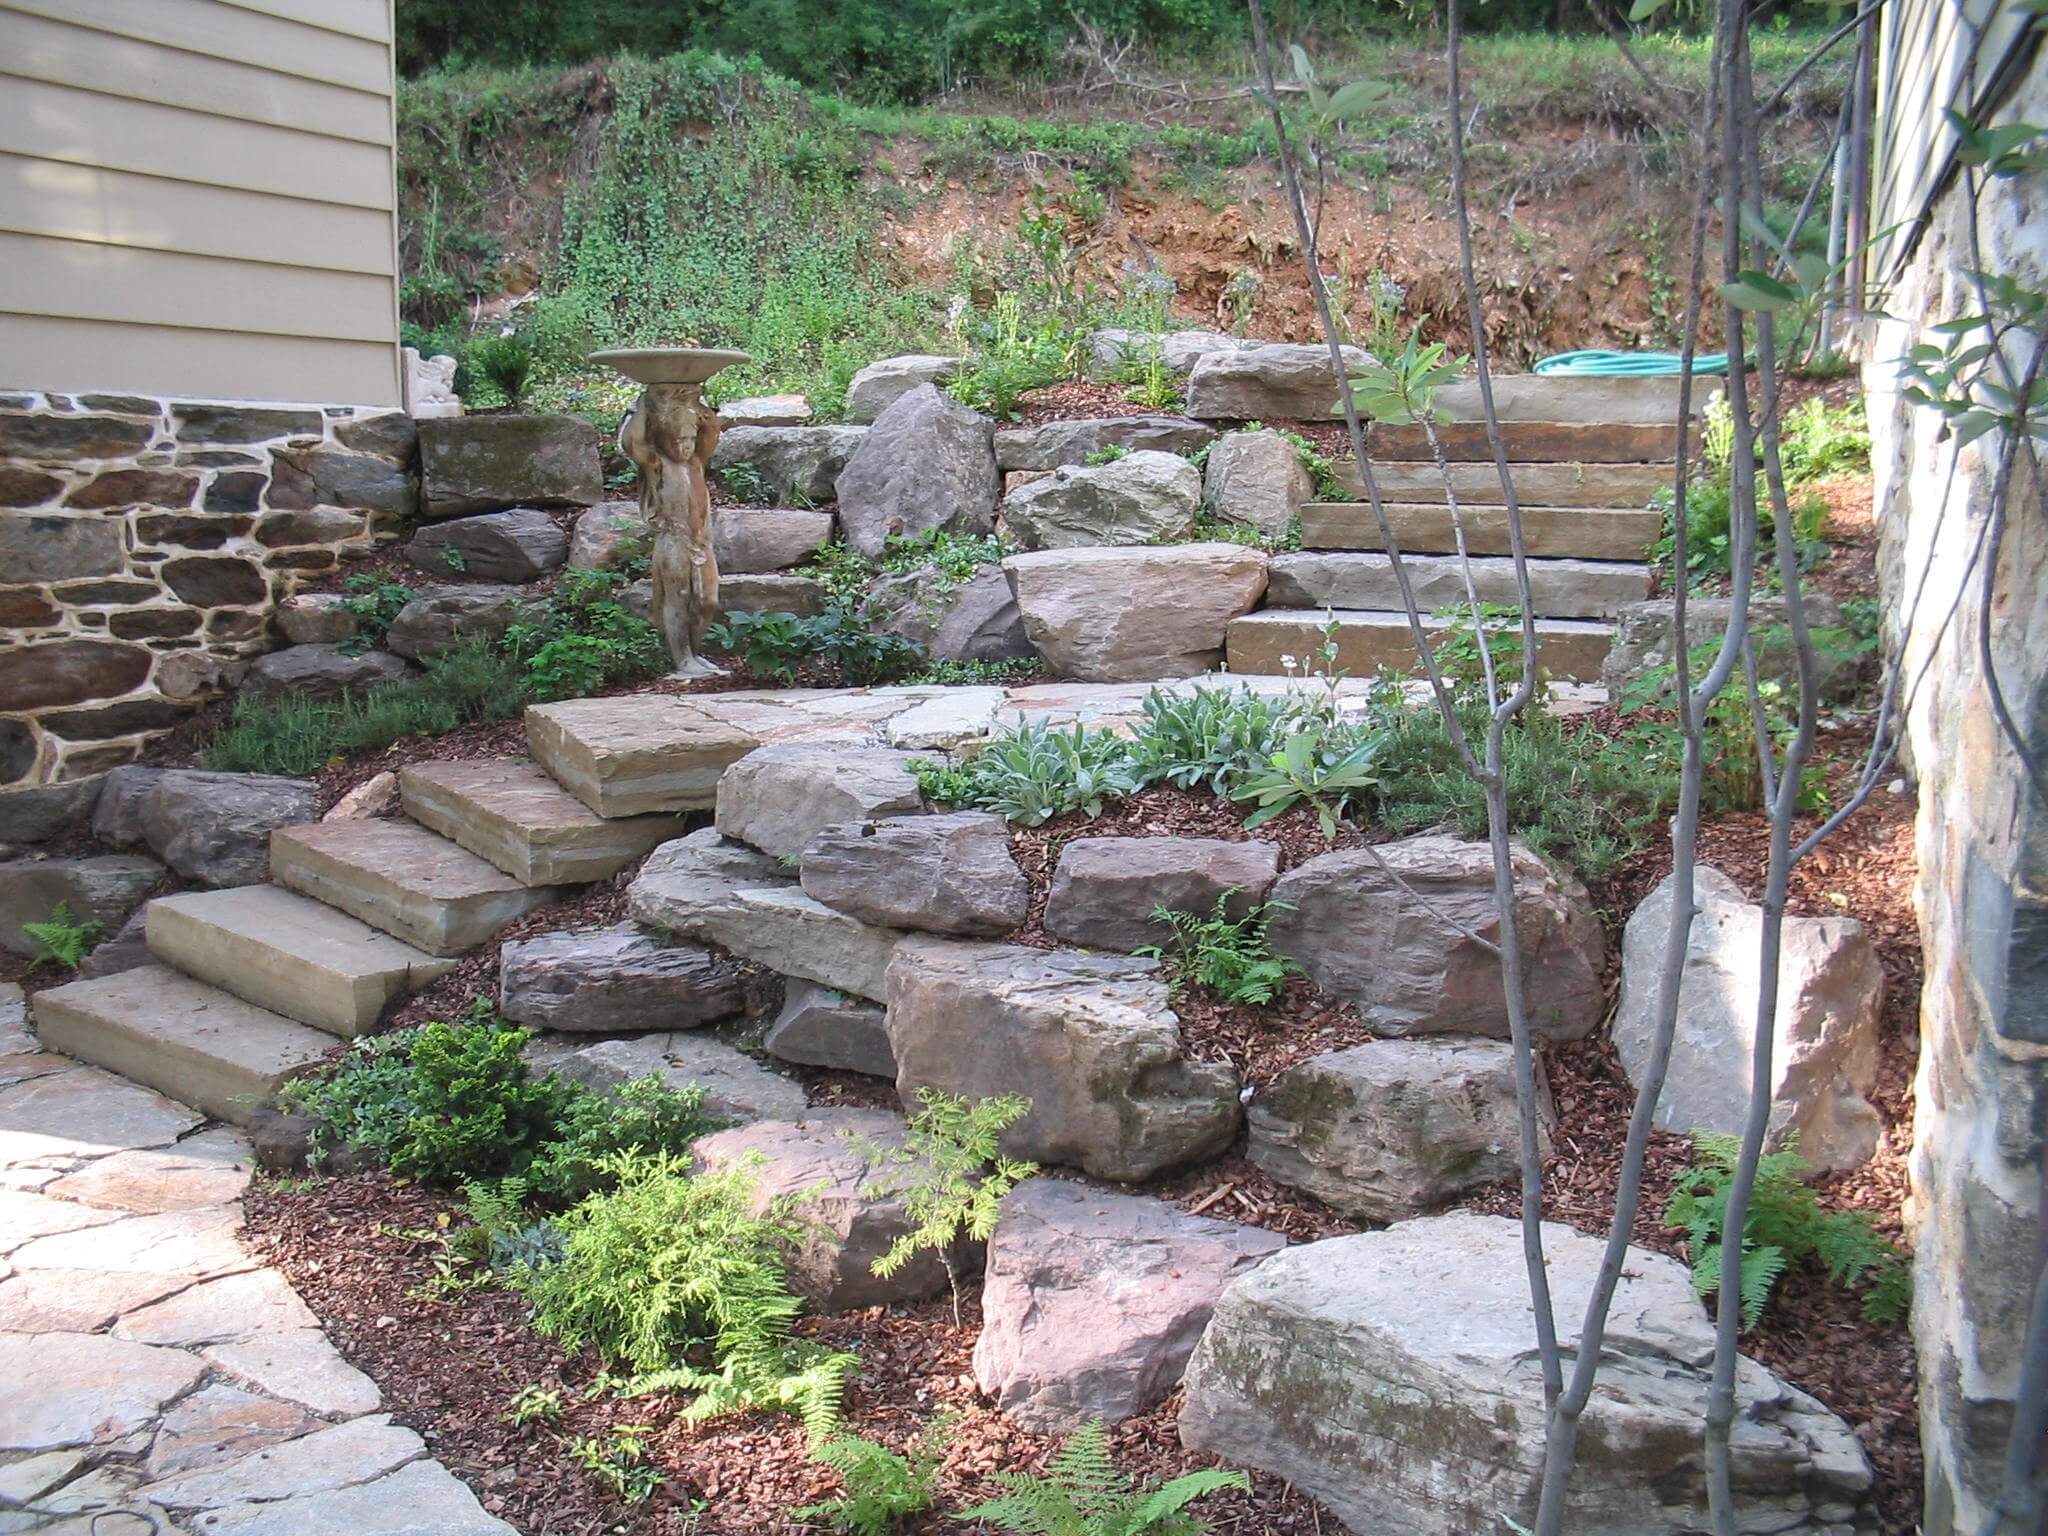 345 Hillside Terraced with Stone Steppers and Boulders